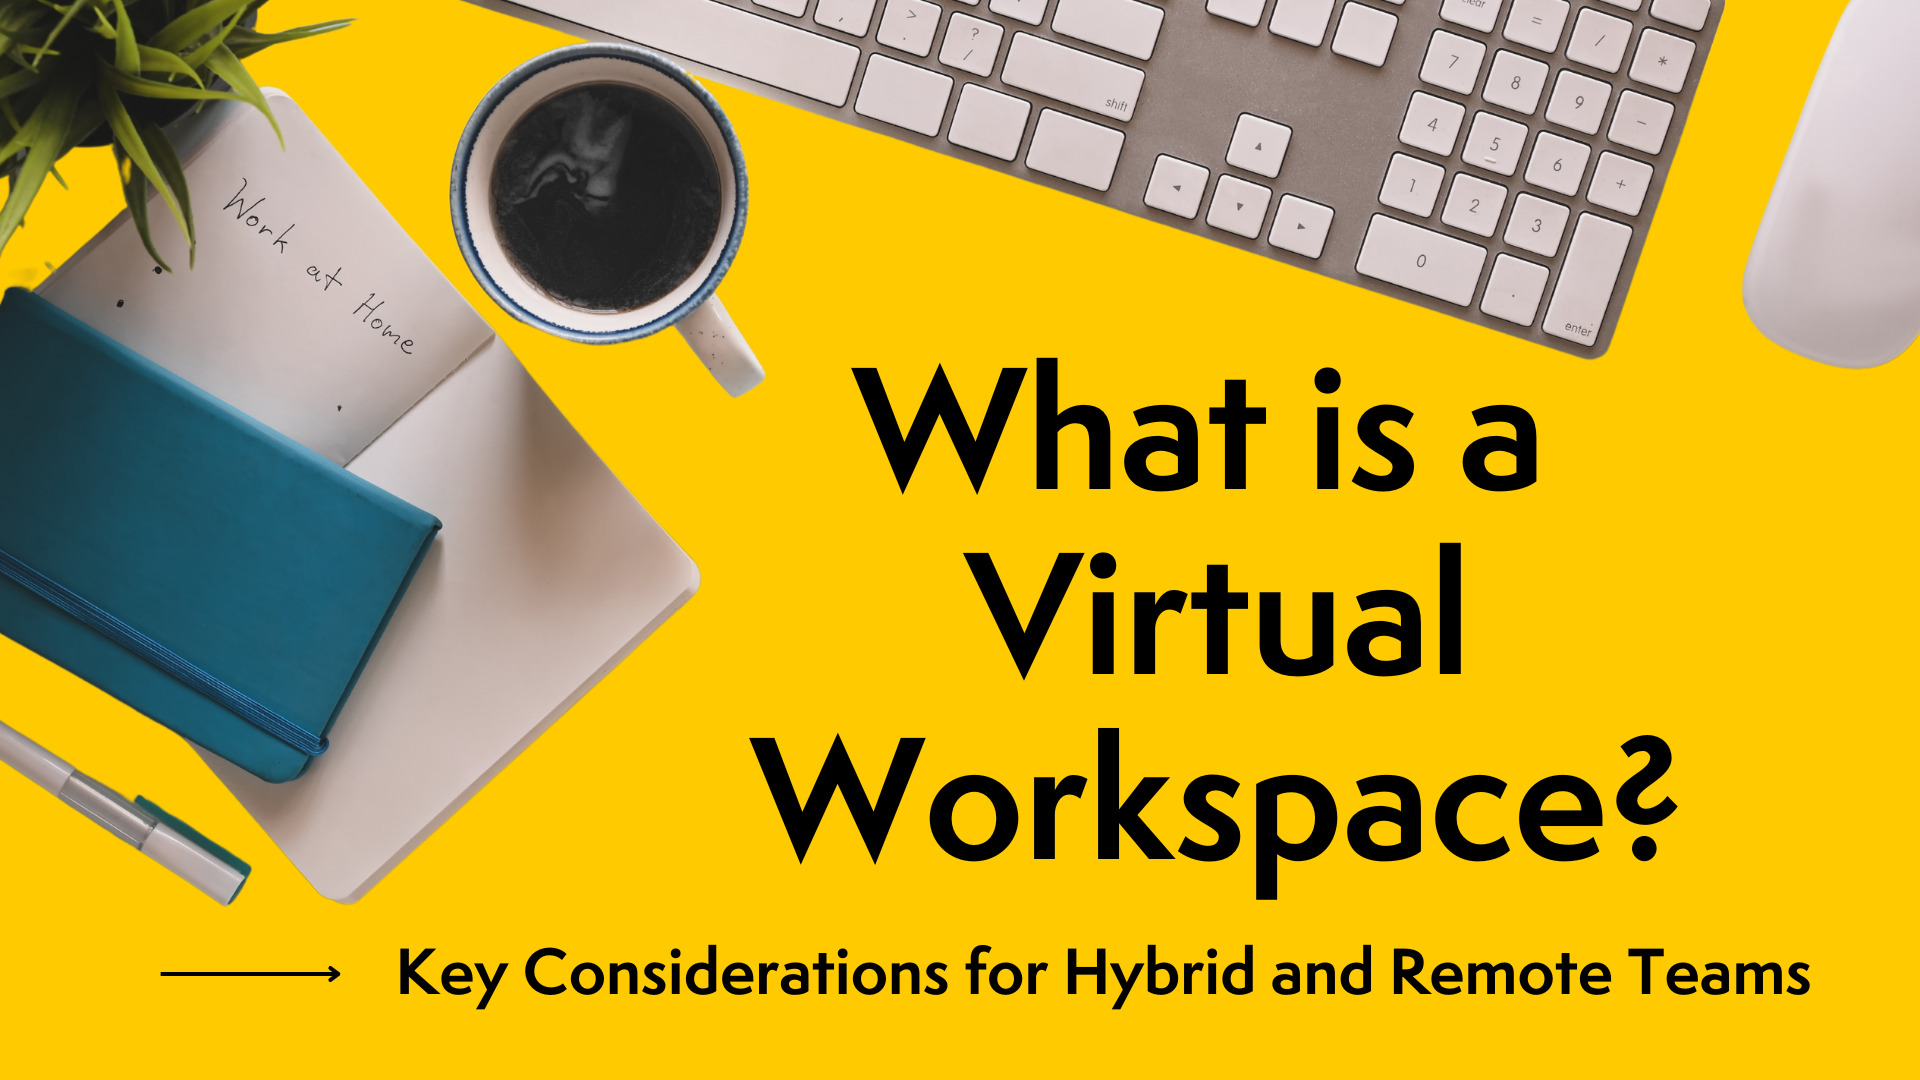 What is a Virtual Workspace? Key Considerations for Hybrid and Remote Teams